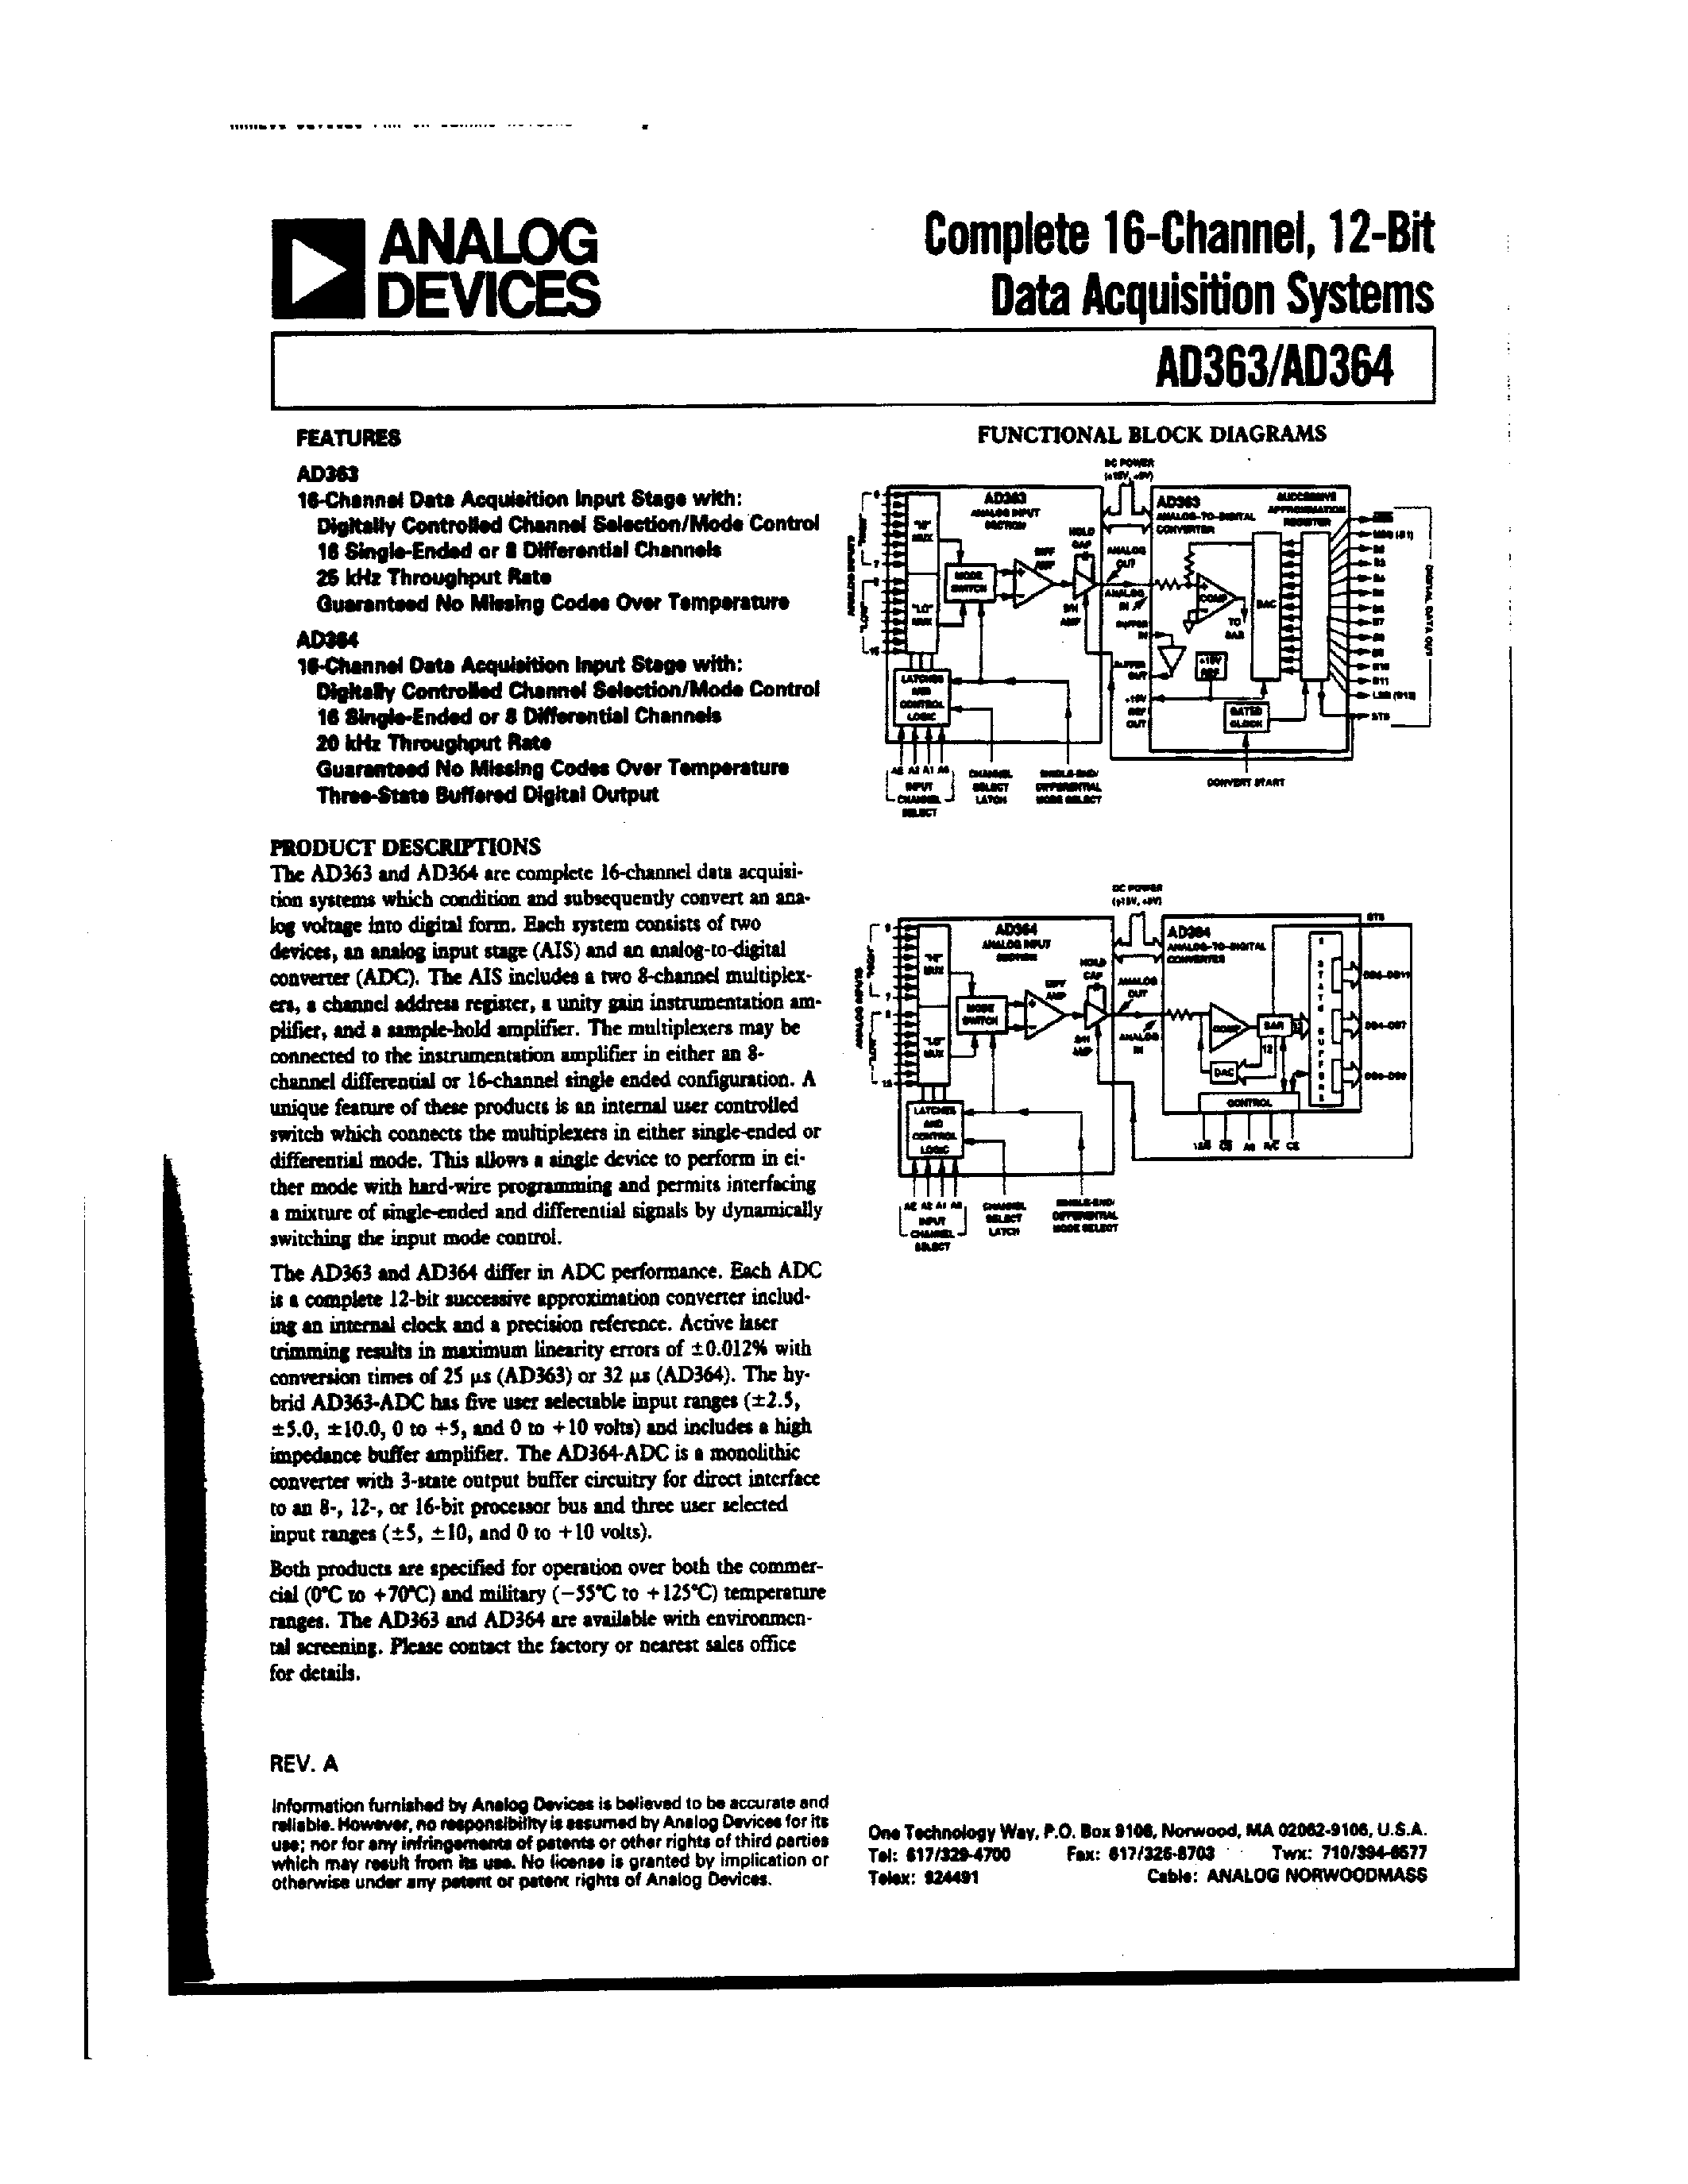 Datasheet AD364RKD - Complete 16-Channel/12-Bit Data Acquisition System page 1